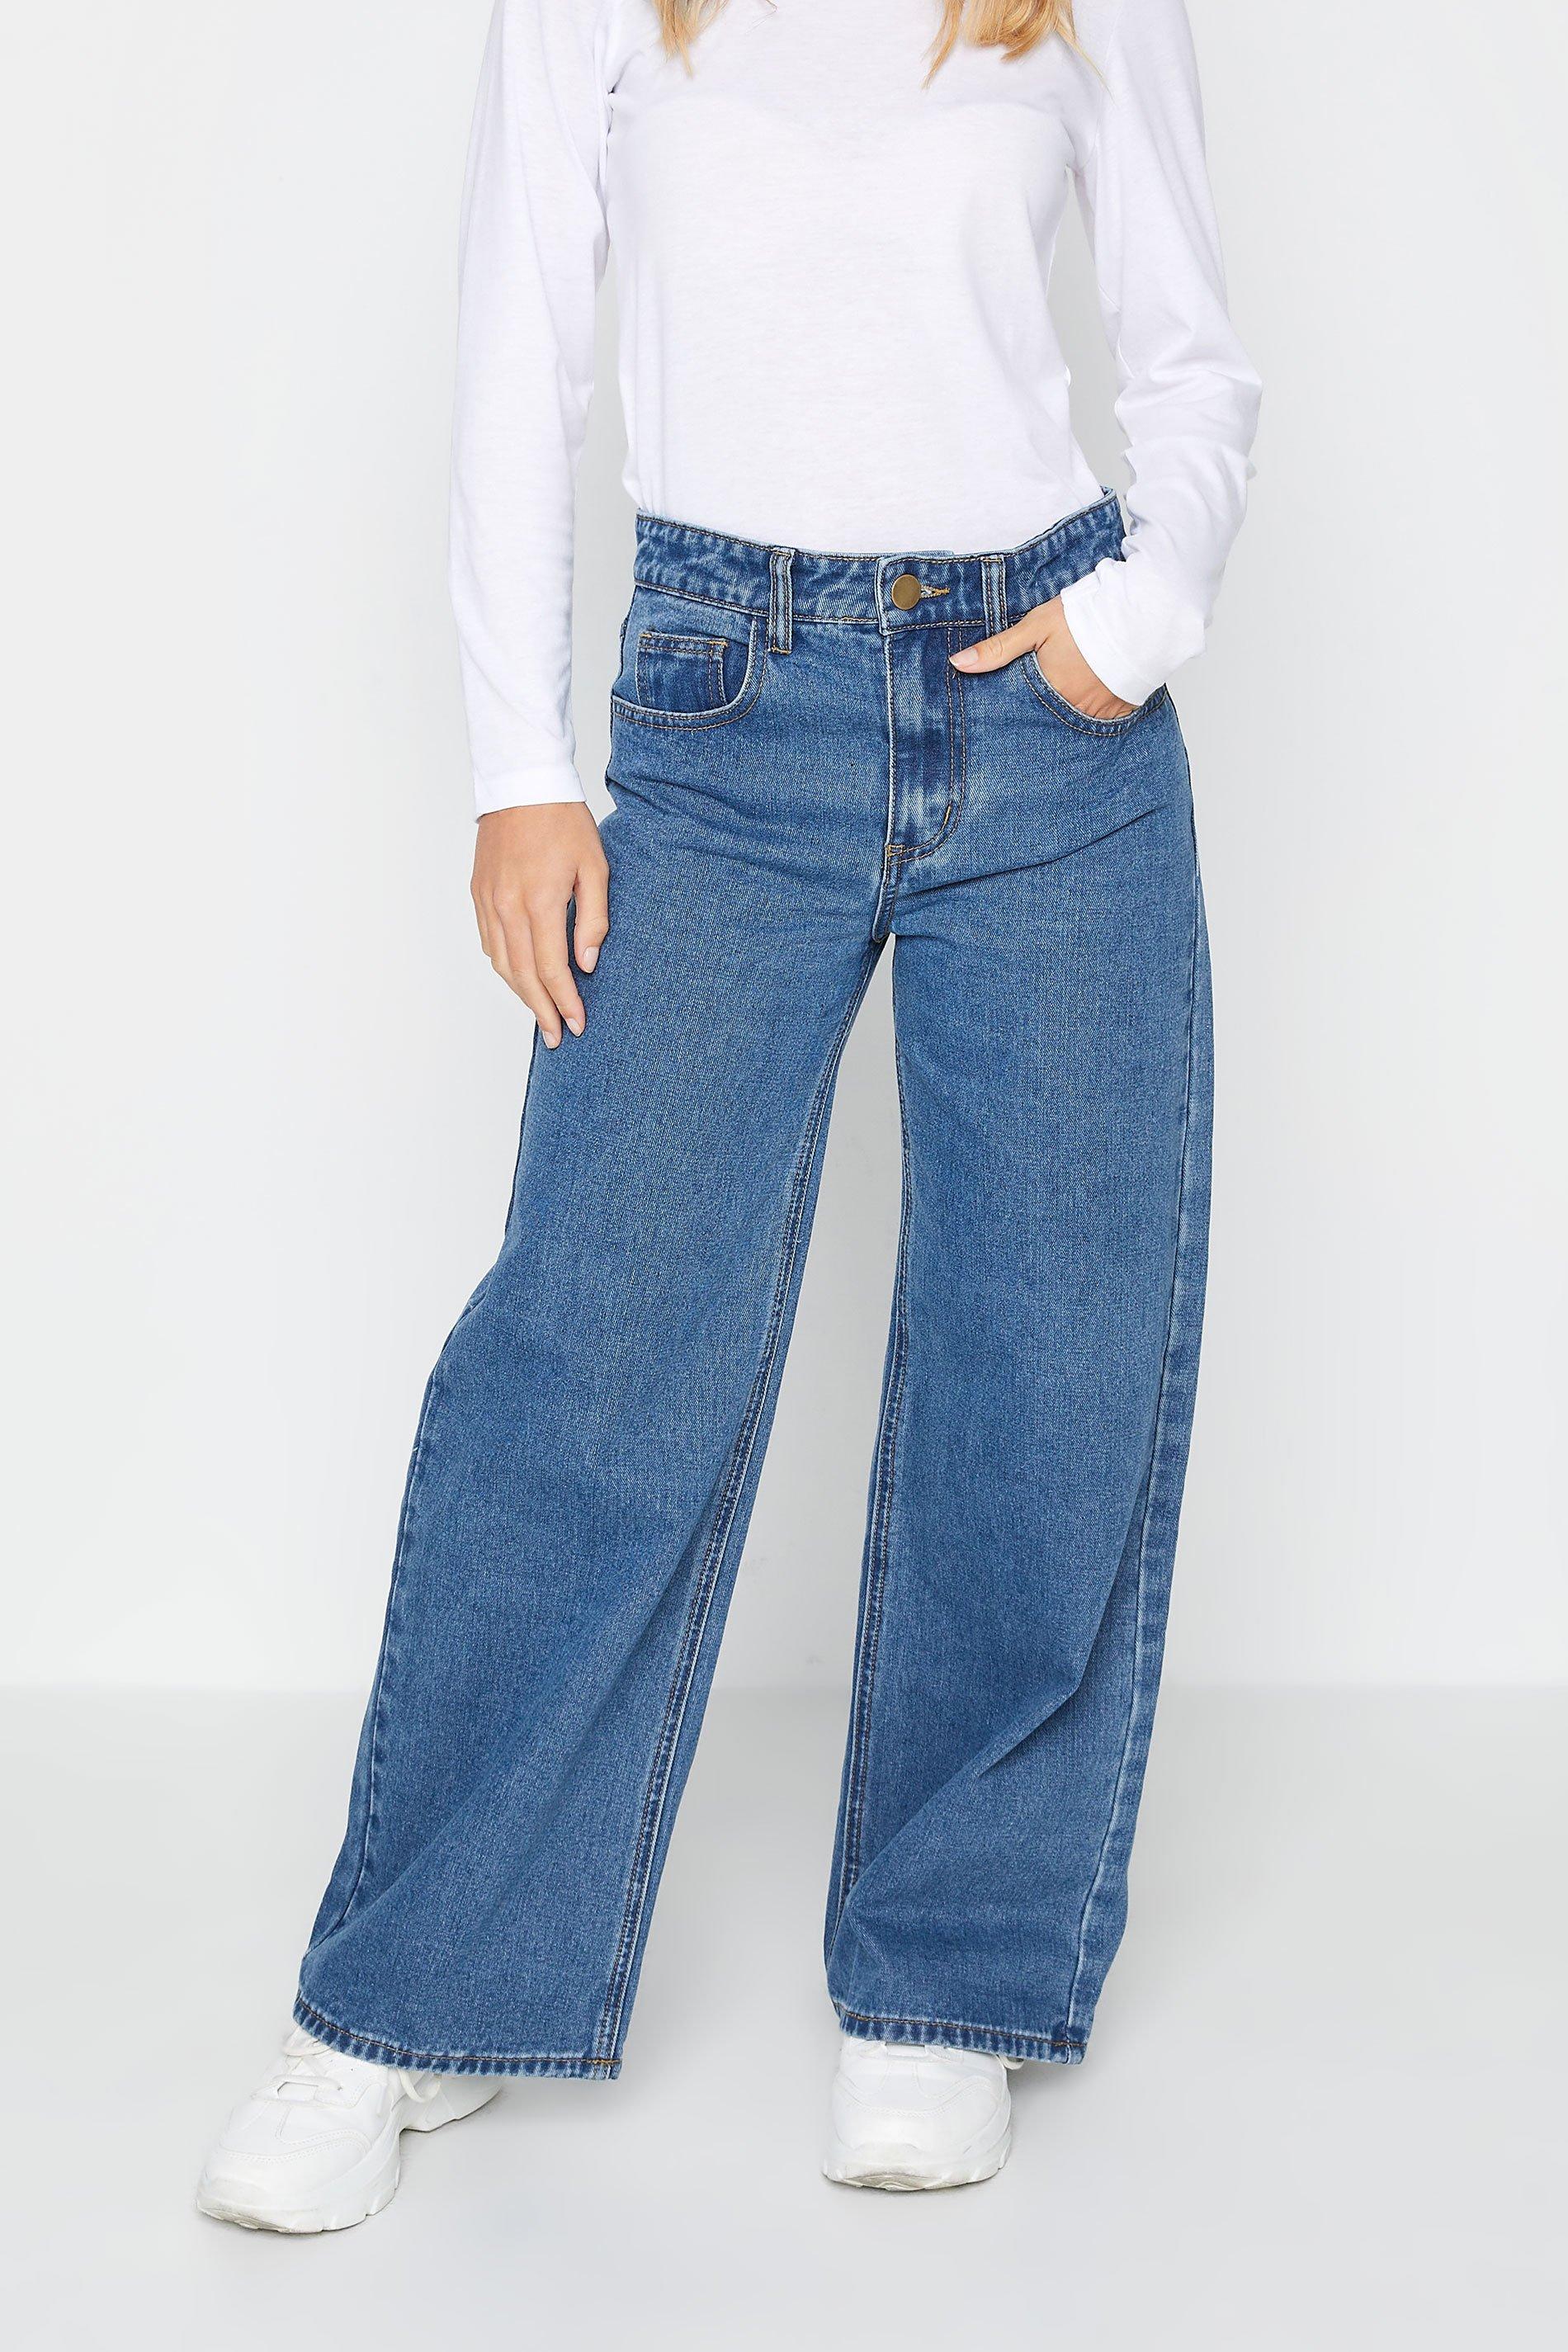 Denim Jeans Women's Guide For Different Body Types - Bizzield.com